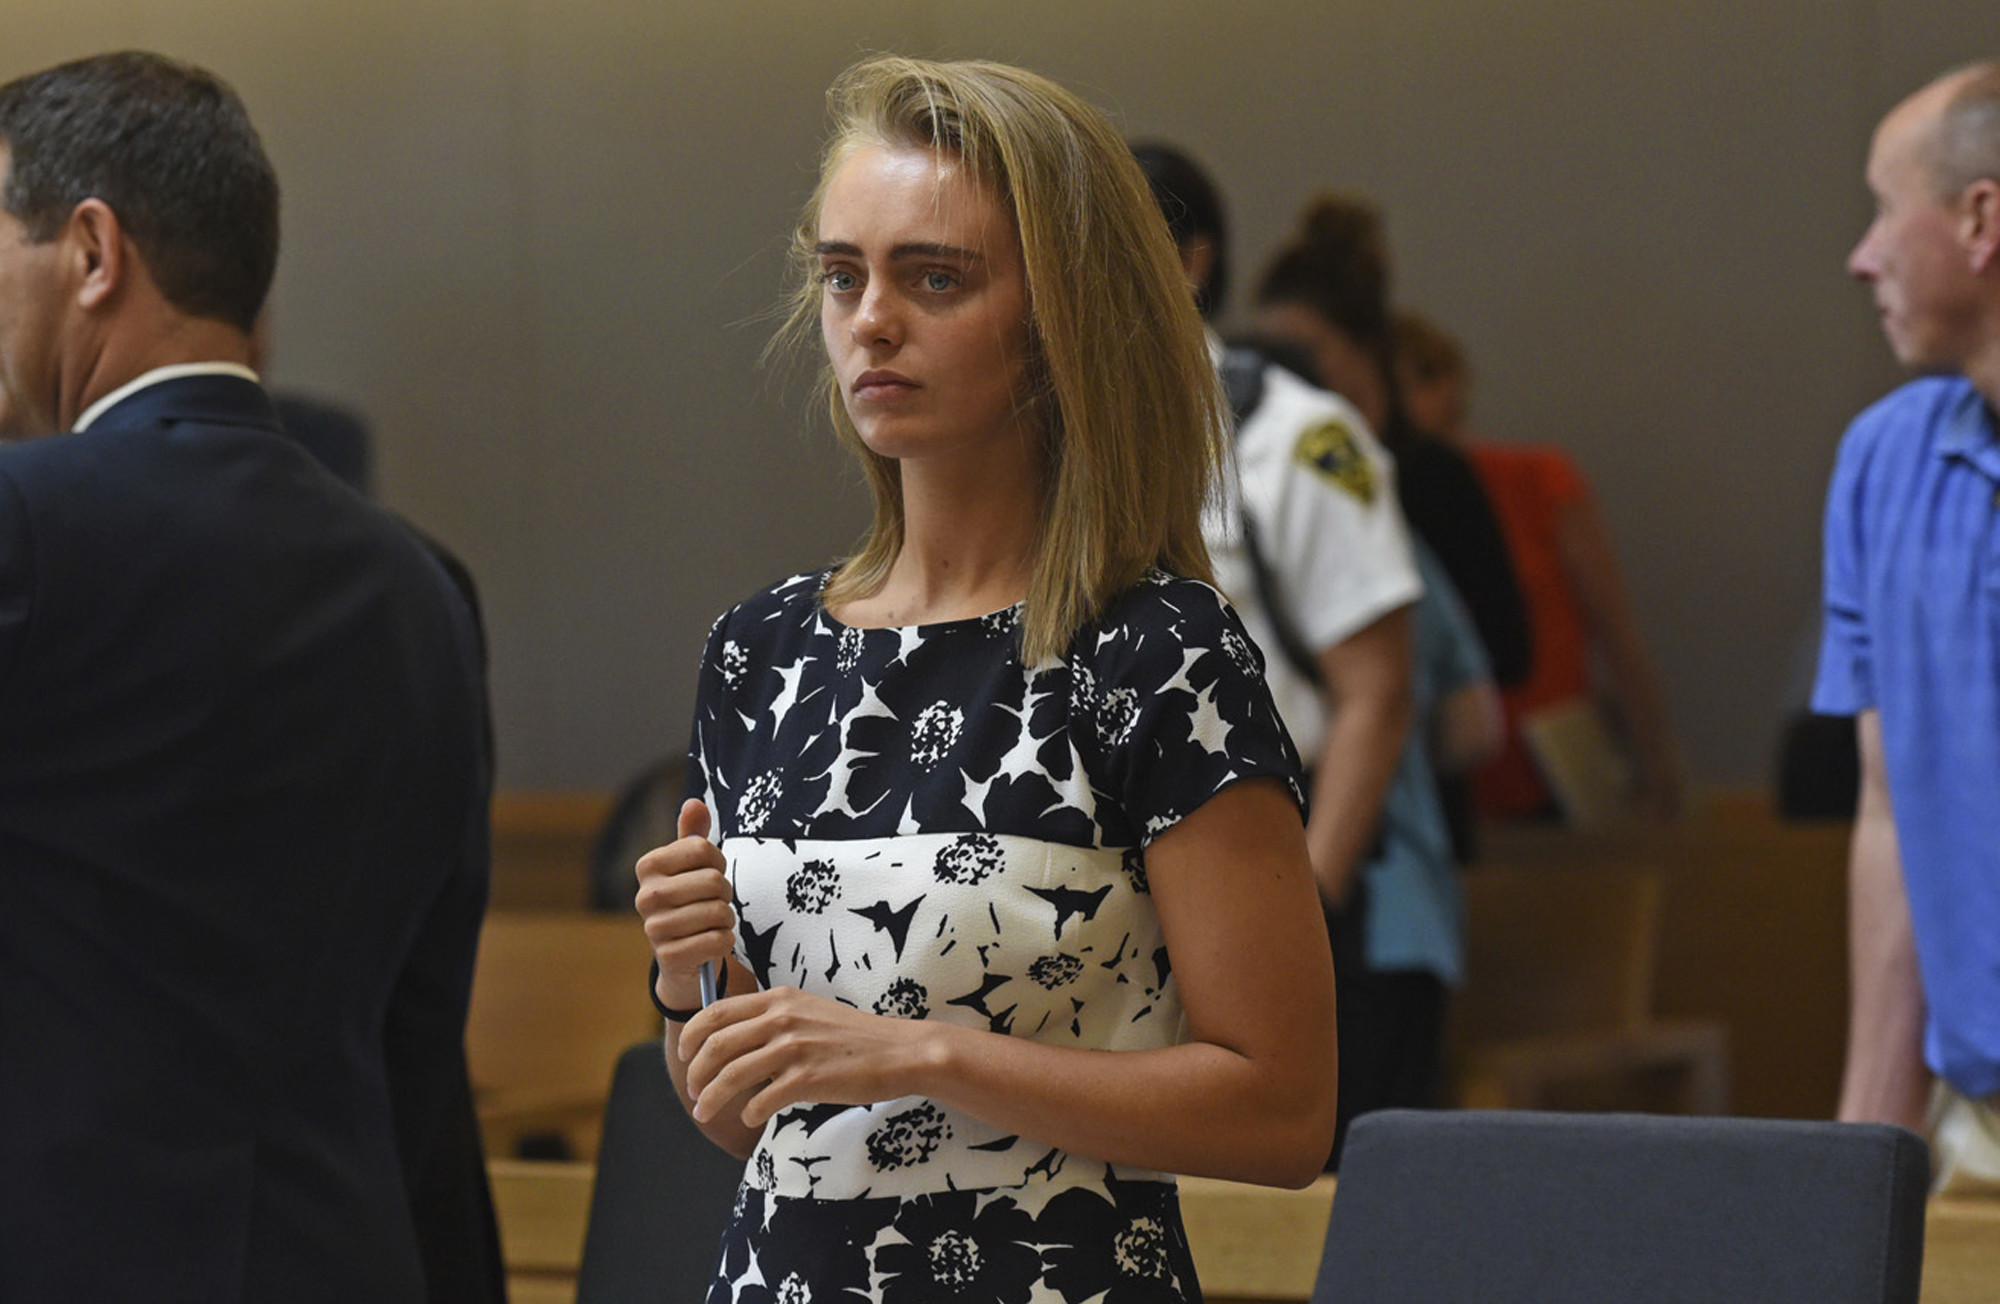 Michelle Carter found guilty in Massachusetts texting suicide case - LA Times2000 x 1304